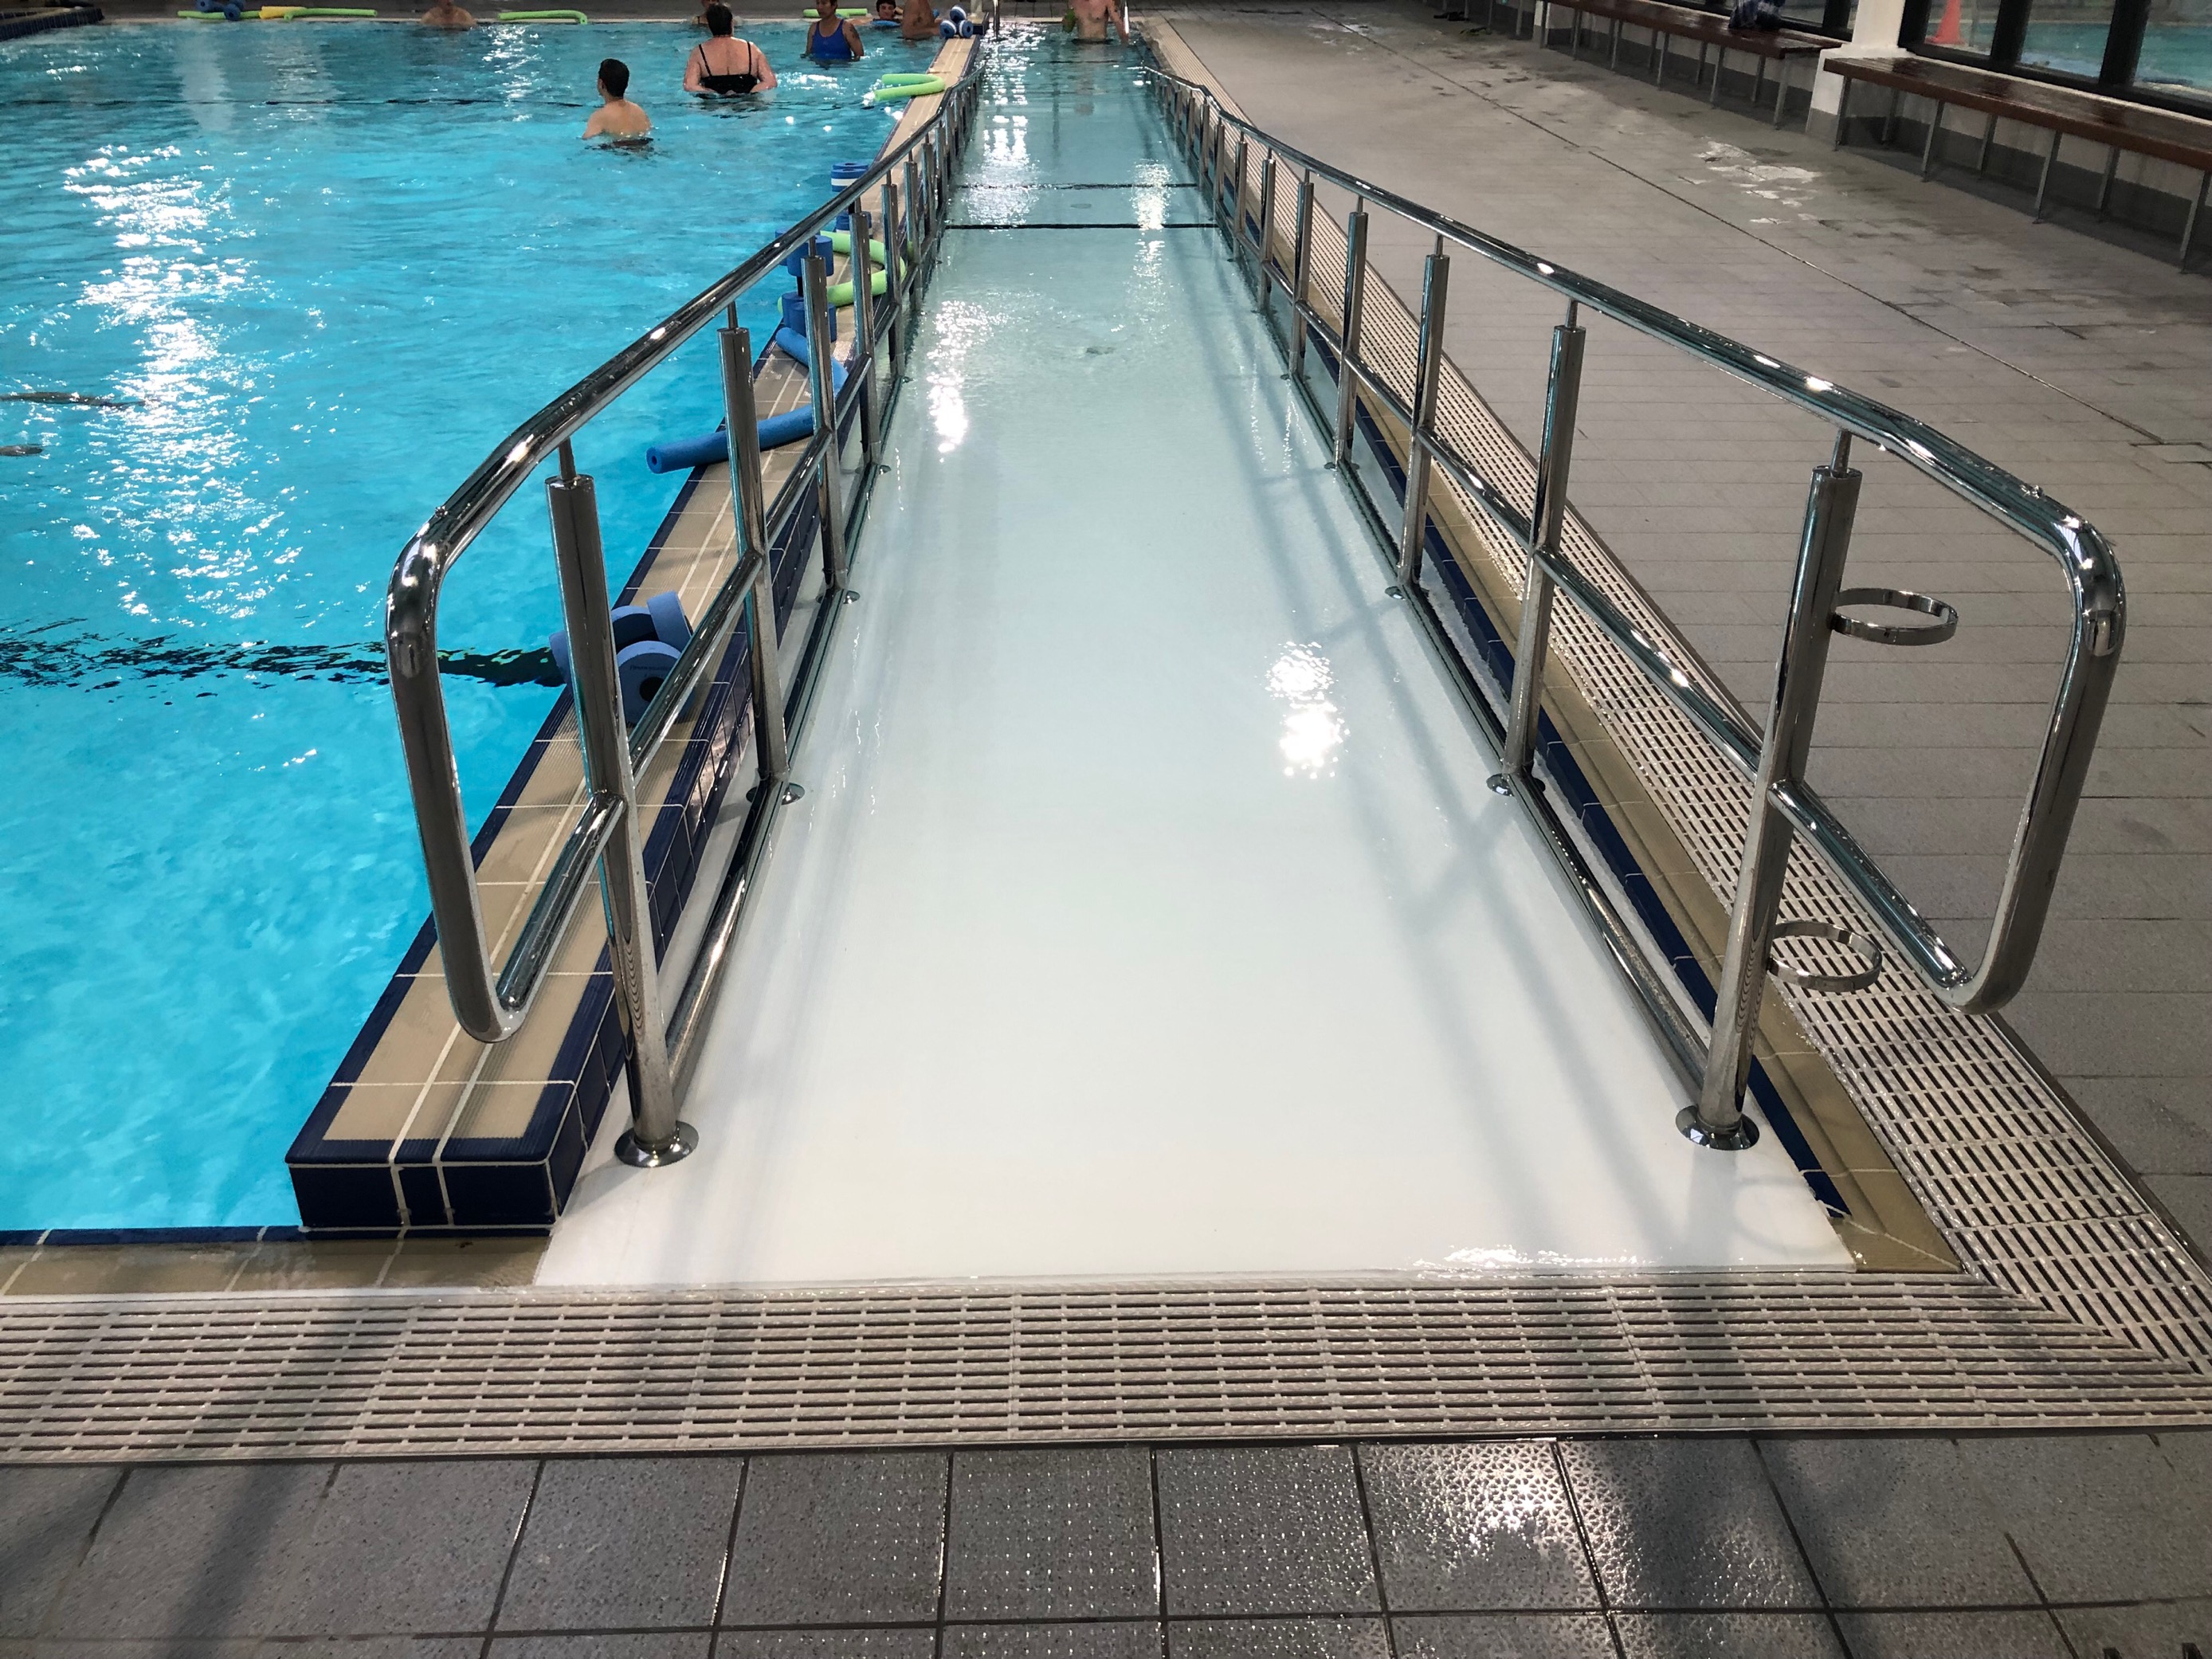 Image of ramp entrance to Warm Water Pool, featuring handrails